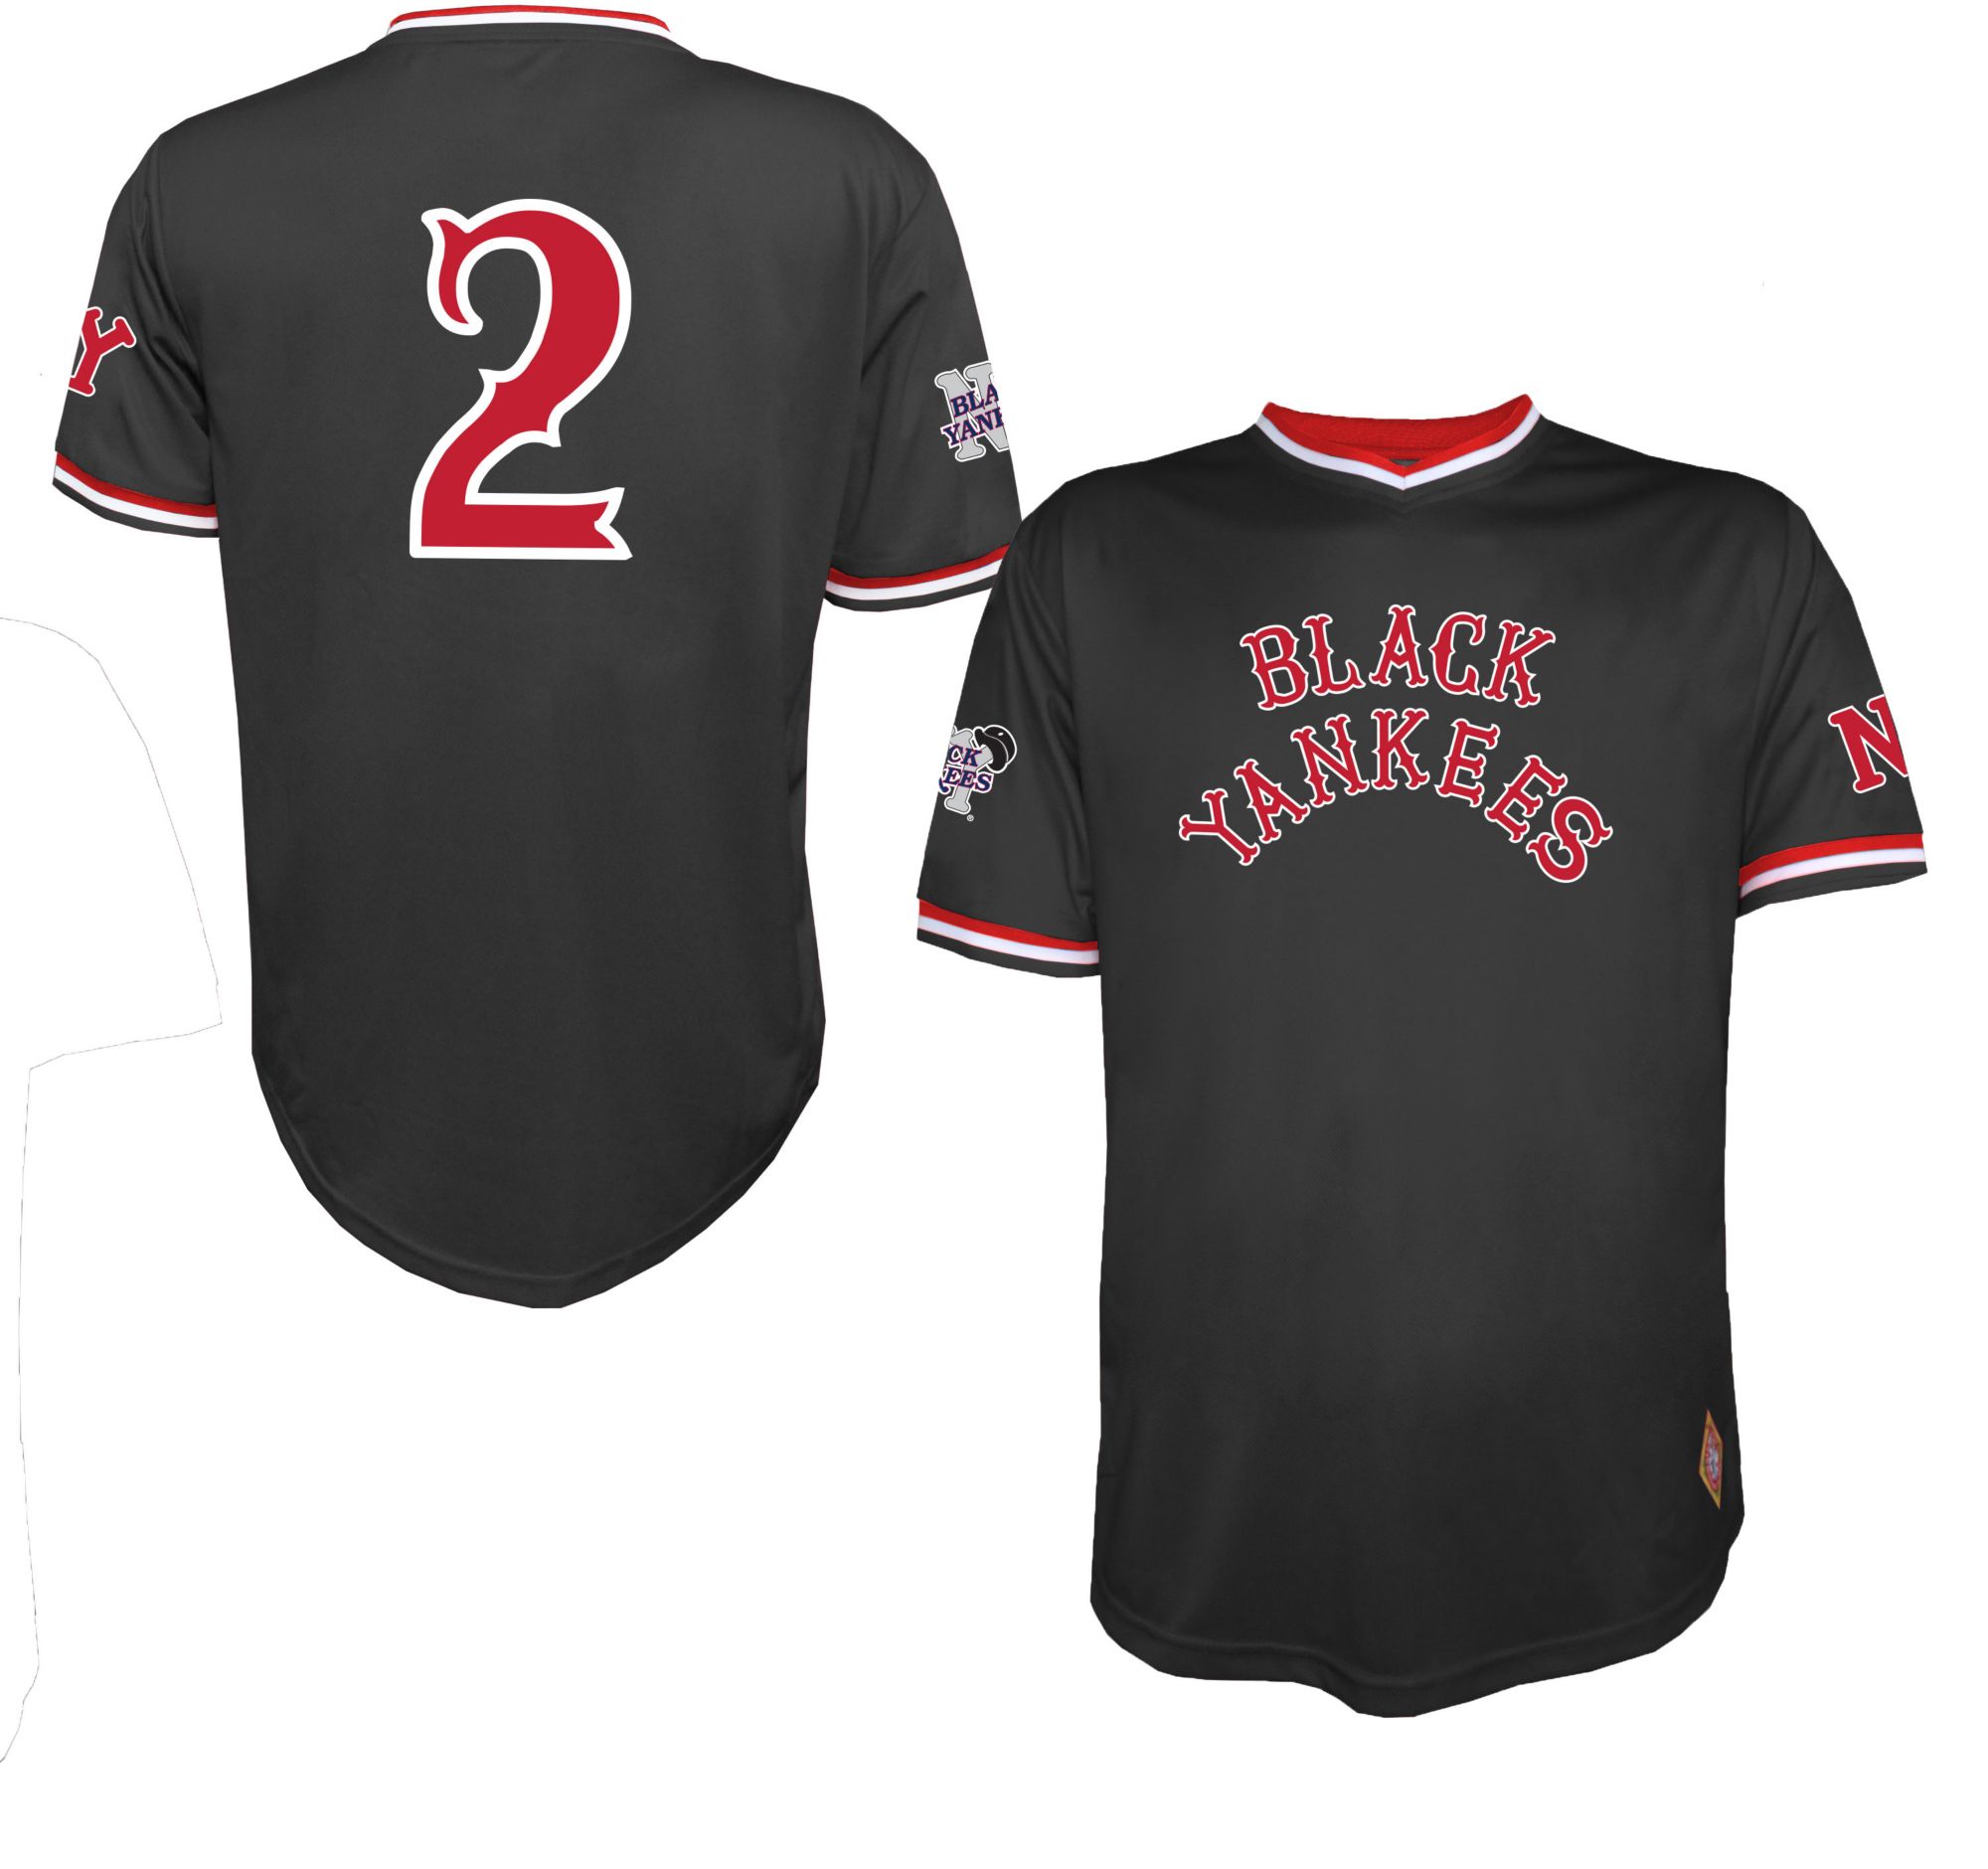 Kids' MLB Apparel  Curbside Pickup Available at DICK'S